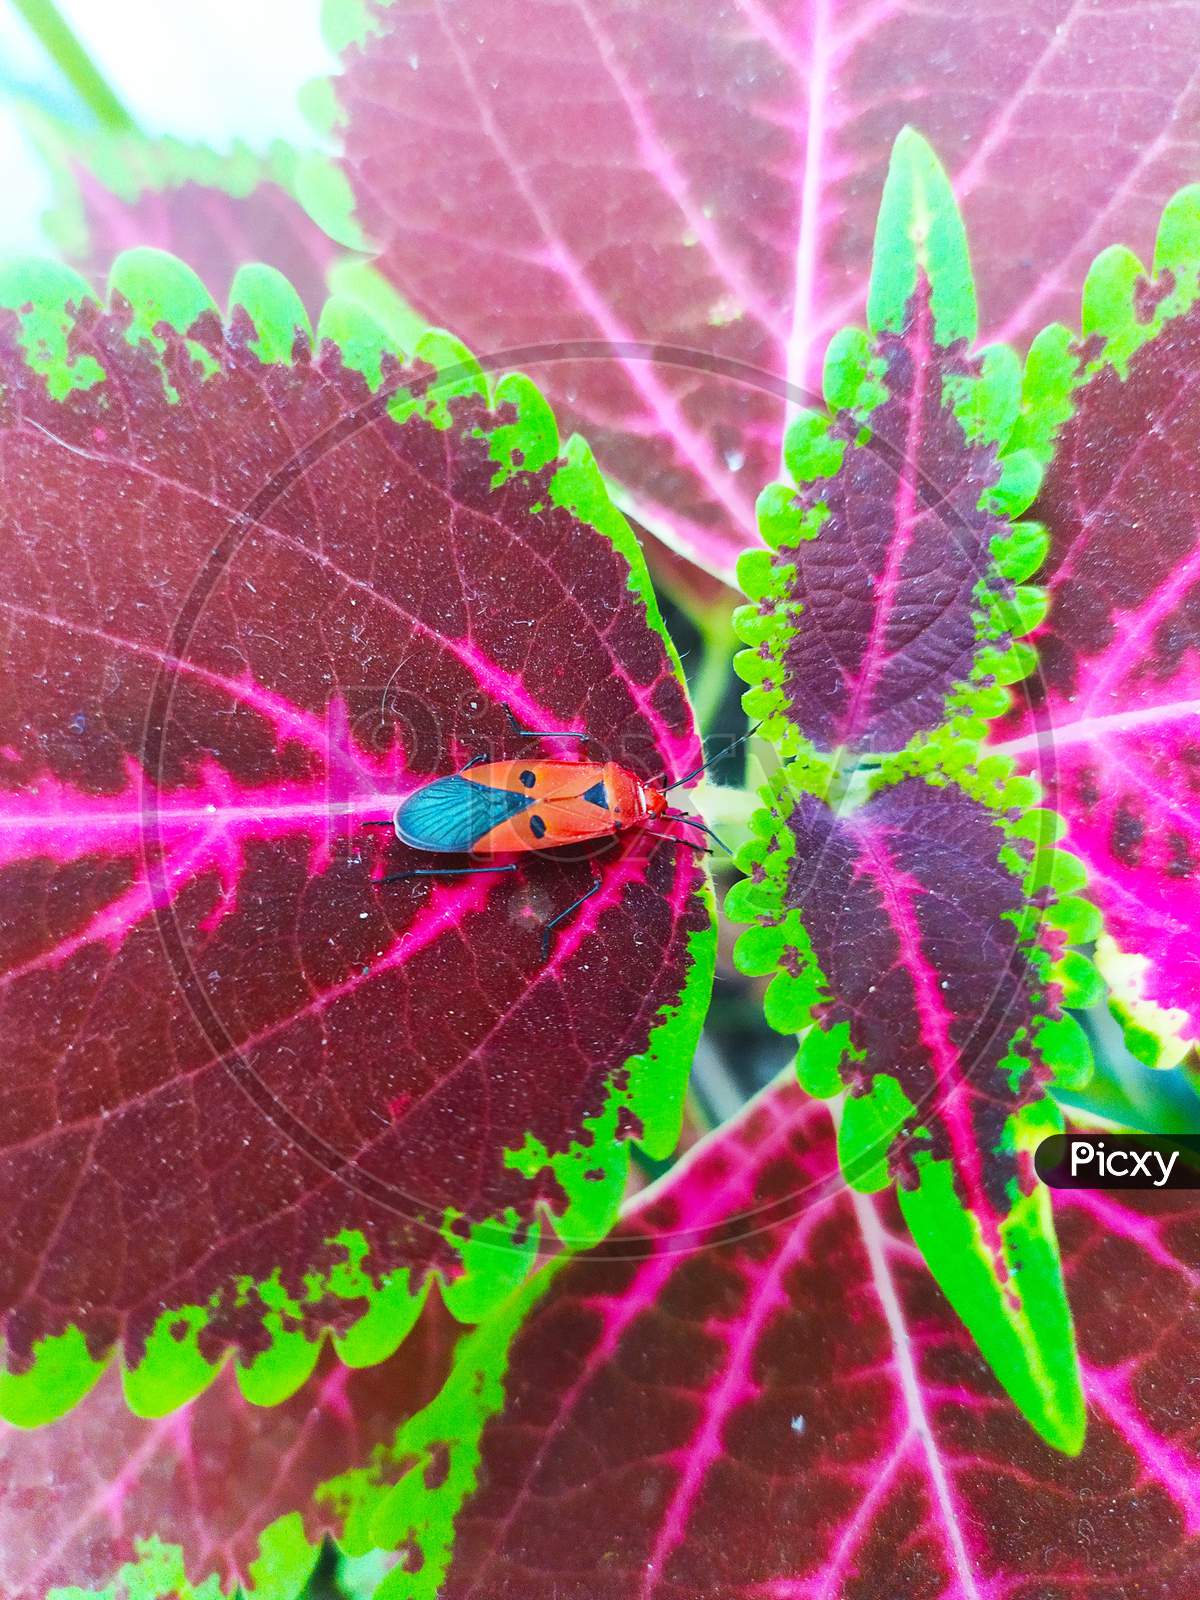 selective focus on Dysdercus cingulatus bug, commonly known as the red cotton stainer. Photographed on the Coleus leaf, the leaf also known as Plectranthus scutellarioides